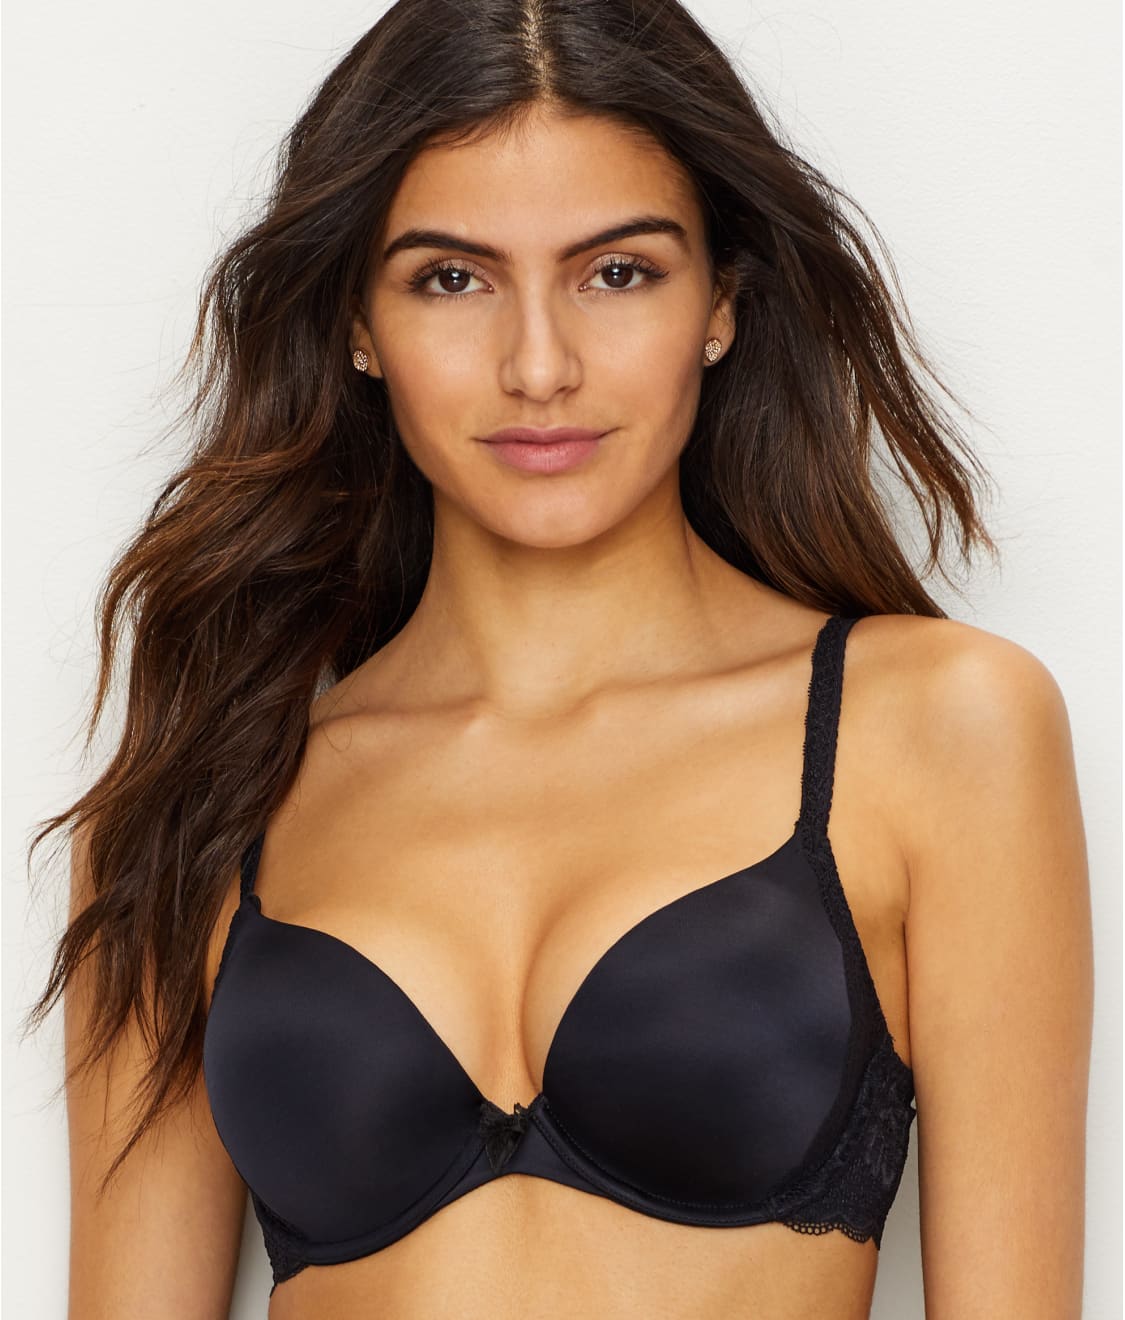 Lily of France Women Convertible Push-Up bras